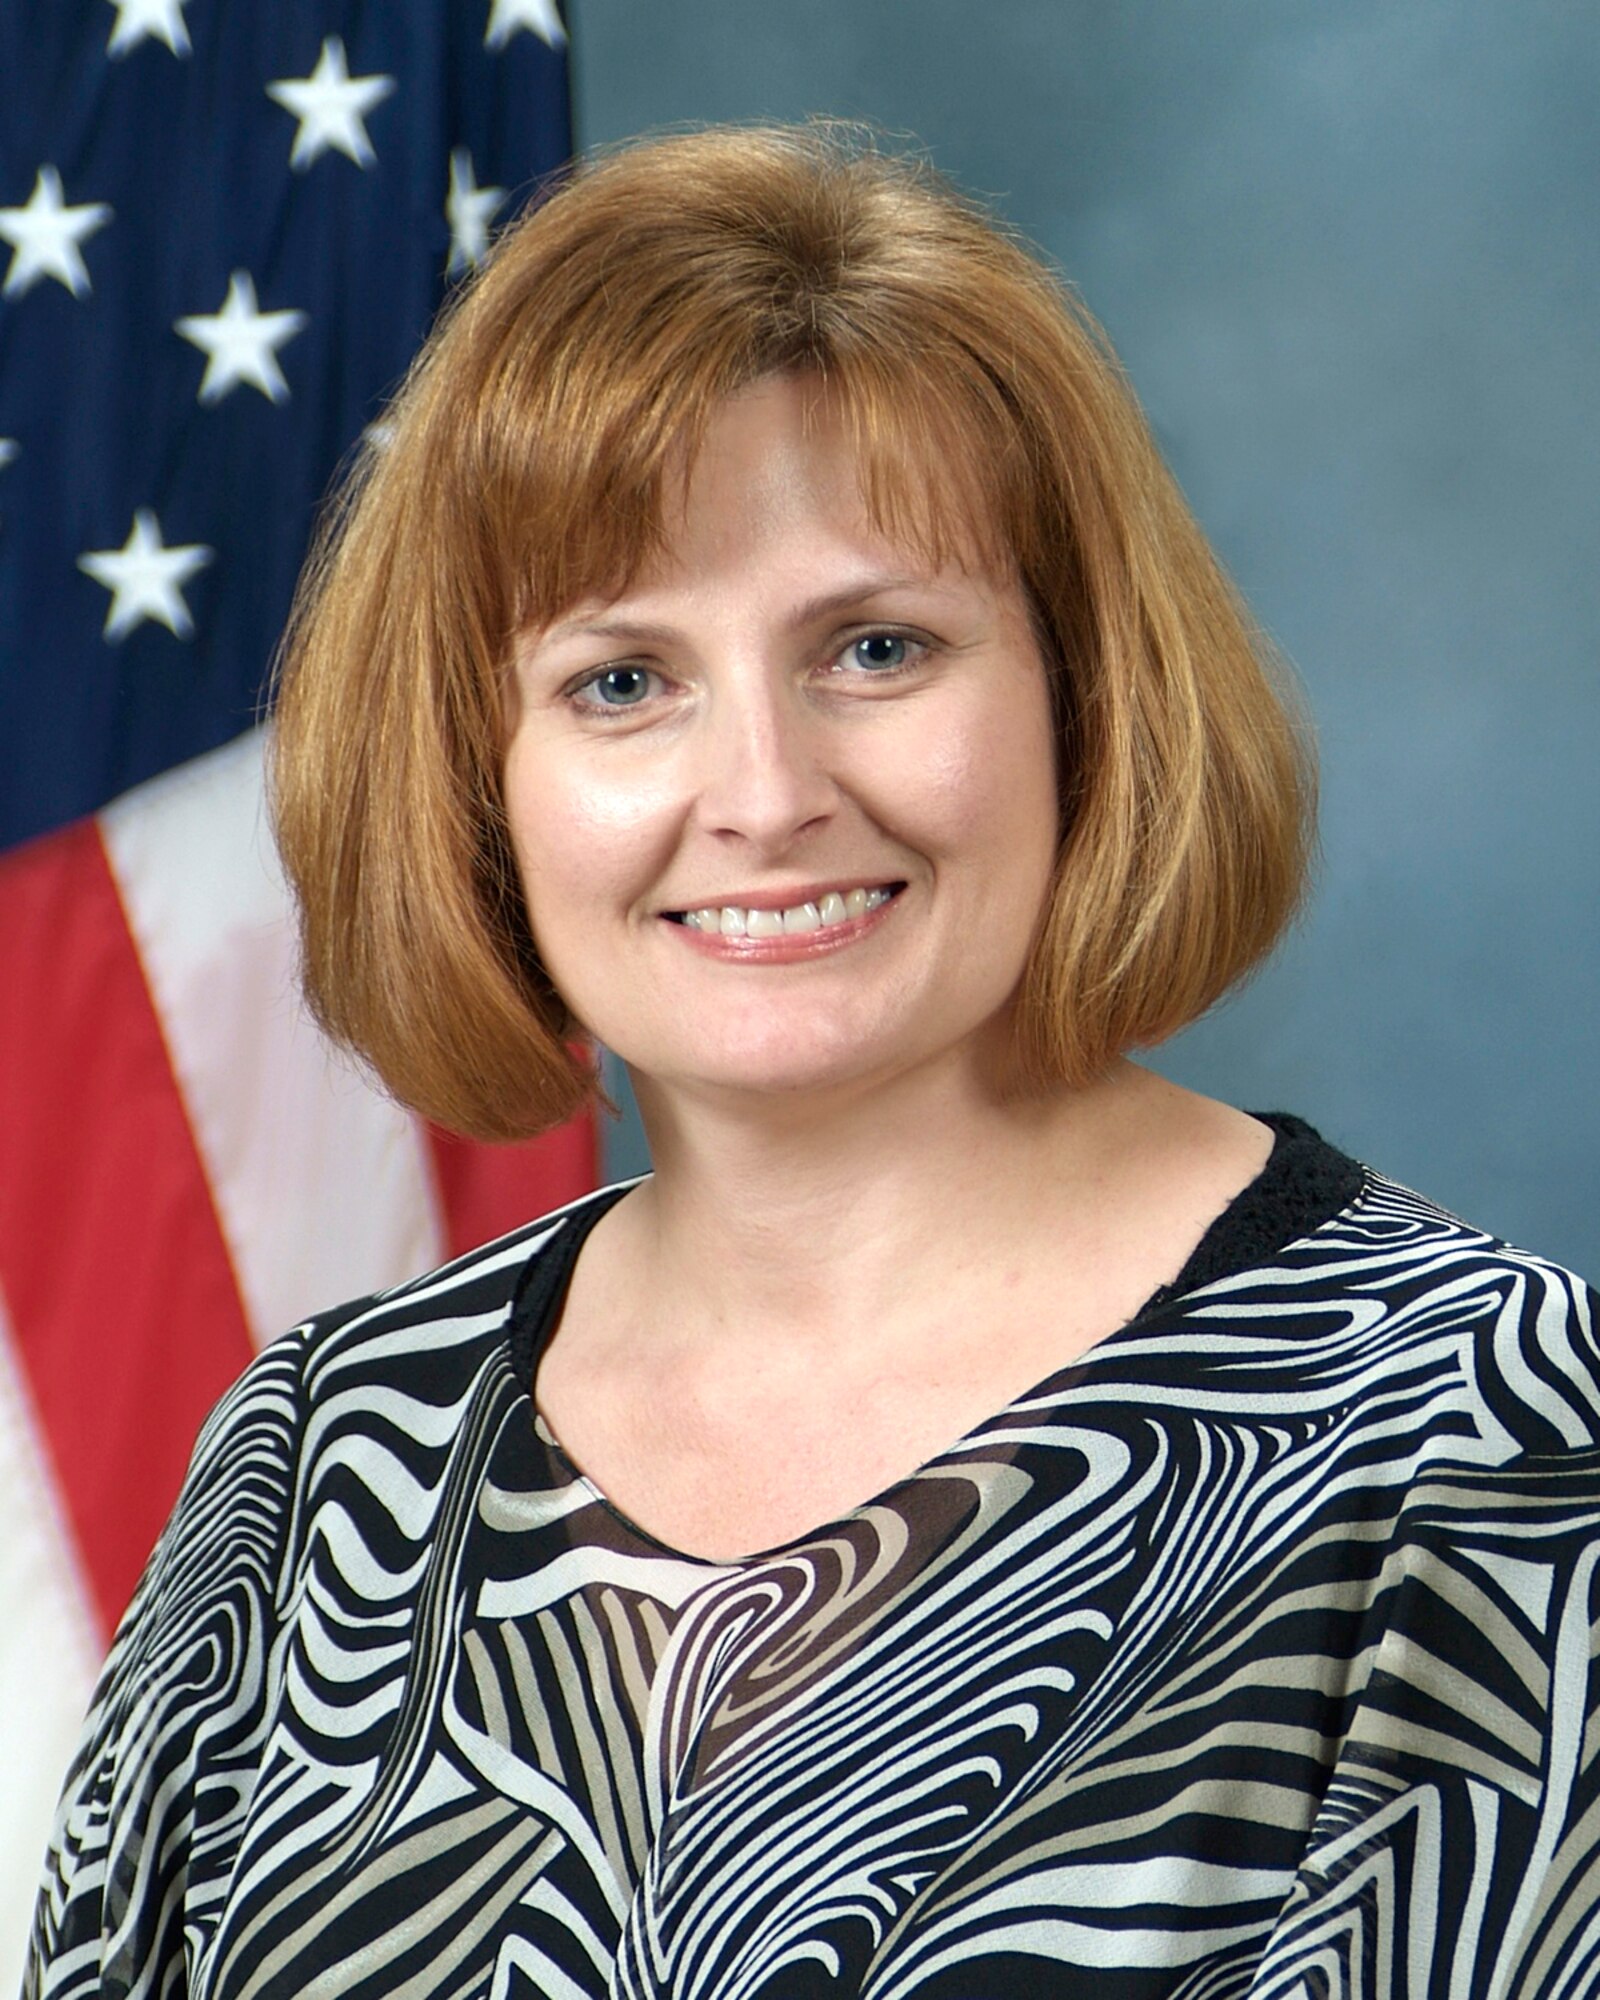 Amy Wren, from the Peterson Spouses Club, has served as the organization's president for two years. As president, she provided unprecedented support to all active and retired military spouses regardless of rank. She oversaw the Peterson Thrift Shop which generates more than $20,000 in revenue annually for the welfare and scholarship fund. Never missing a meeting or function, she directed several vital programs, including Right Start, the Peterson Spouse’s Club Web site and newsletter and acted as the liaison for the American Red Cross. Ms. Wren re-introduced the “Meals While Mending Program” providing comfort for members in need. She also coordinated with more than 650 students to support “Donuts with Dad” and “Muffins with Mom.” Finally, her dedication to the Peterson Spouses Club fundraisers increased revenue 600 percent. (U.S. Air Force photo)
